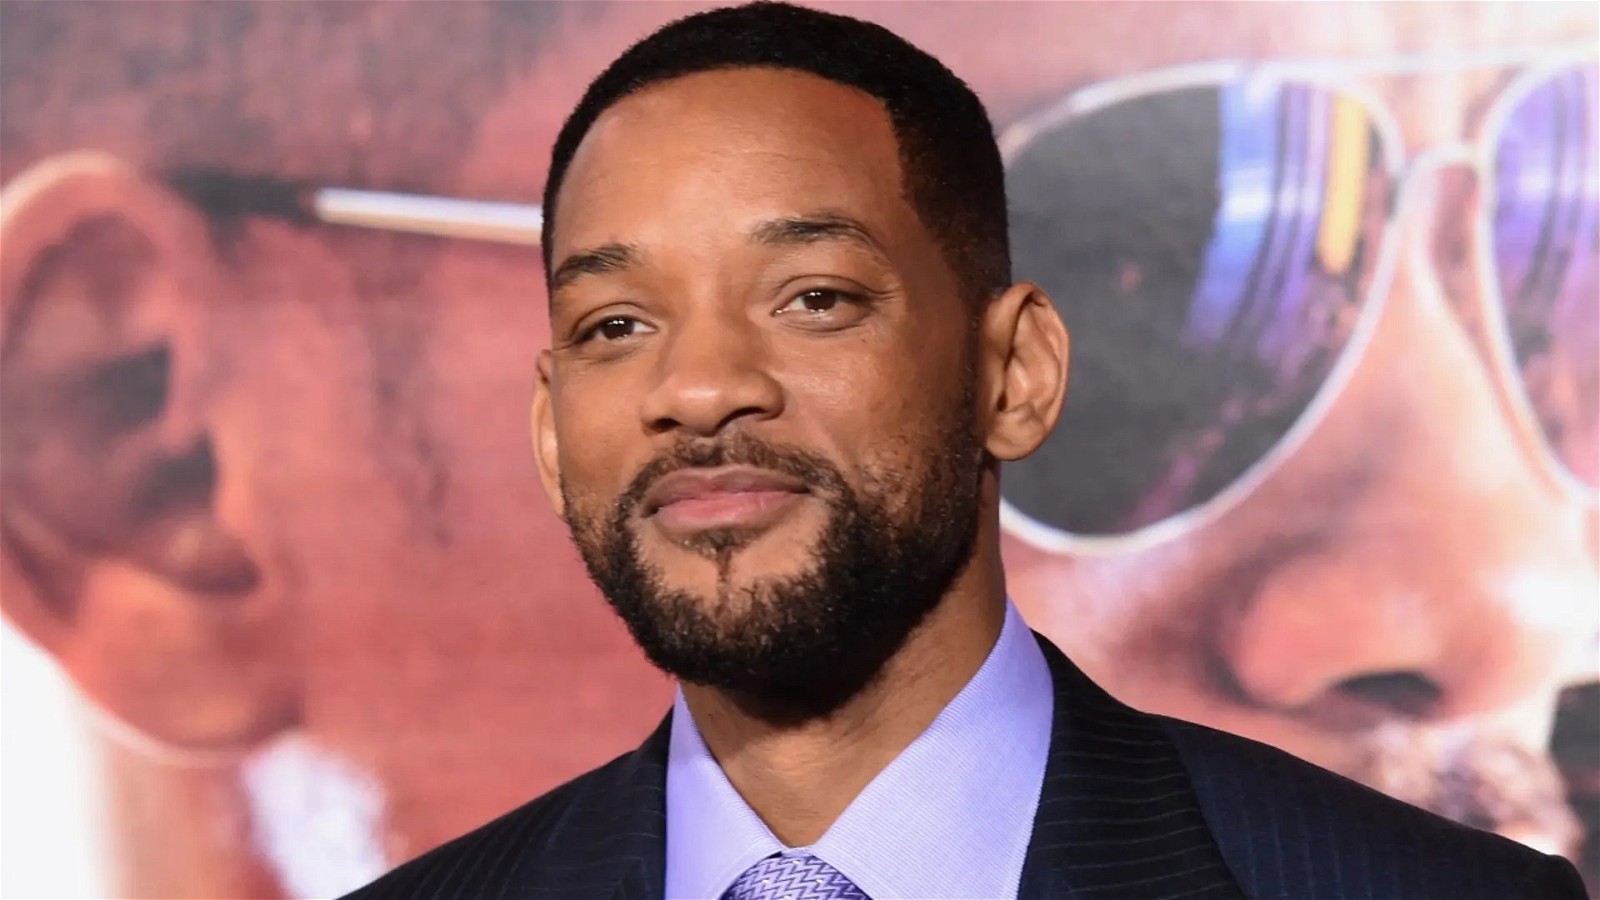 Will Smith, American actor